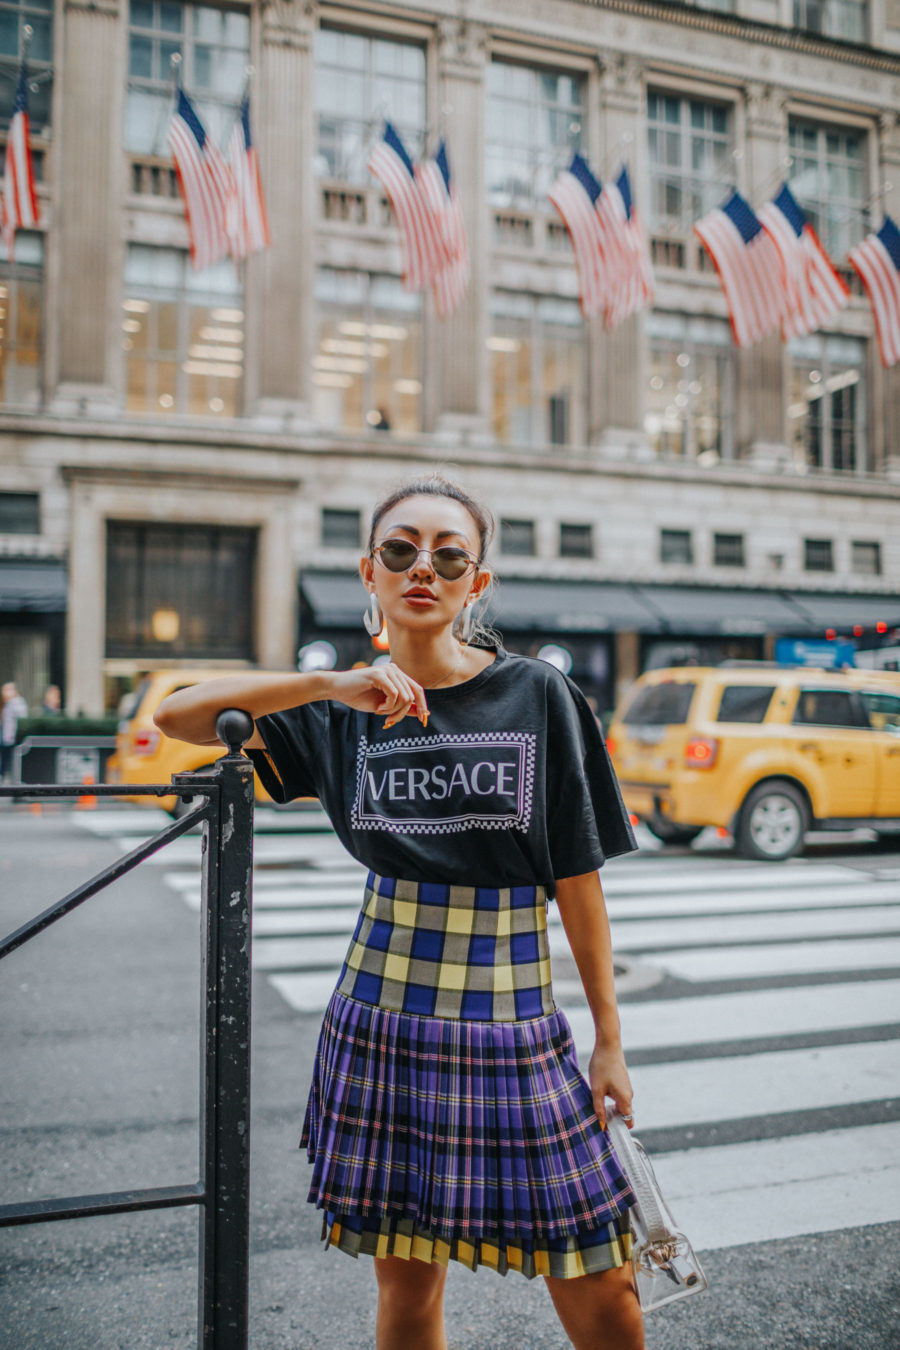 fashion blogger jessica wang shares how to style your graphic tee with a pleated mini skirt // Jessica Wang - NotJessFashion.com